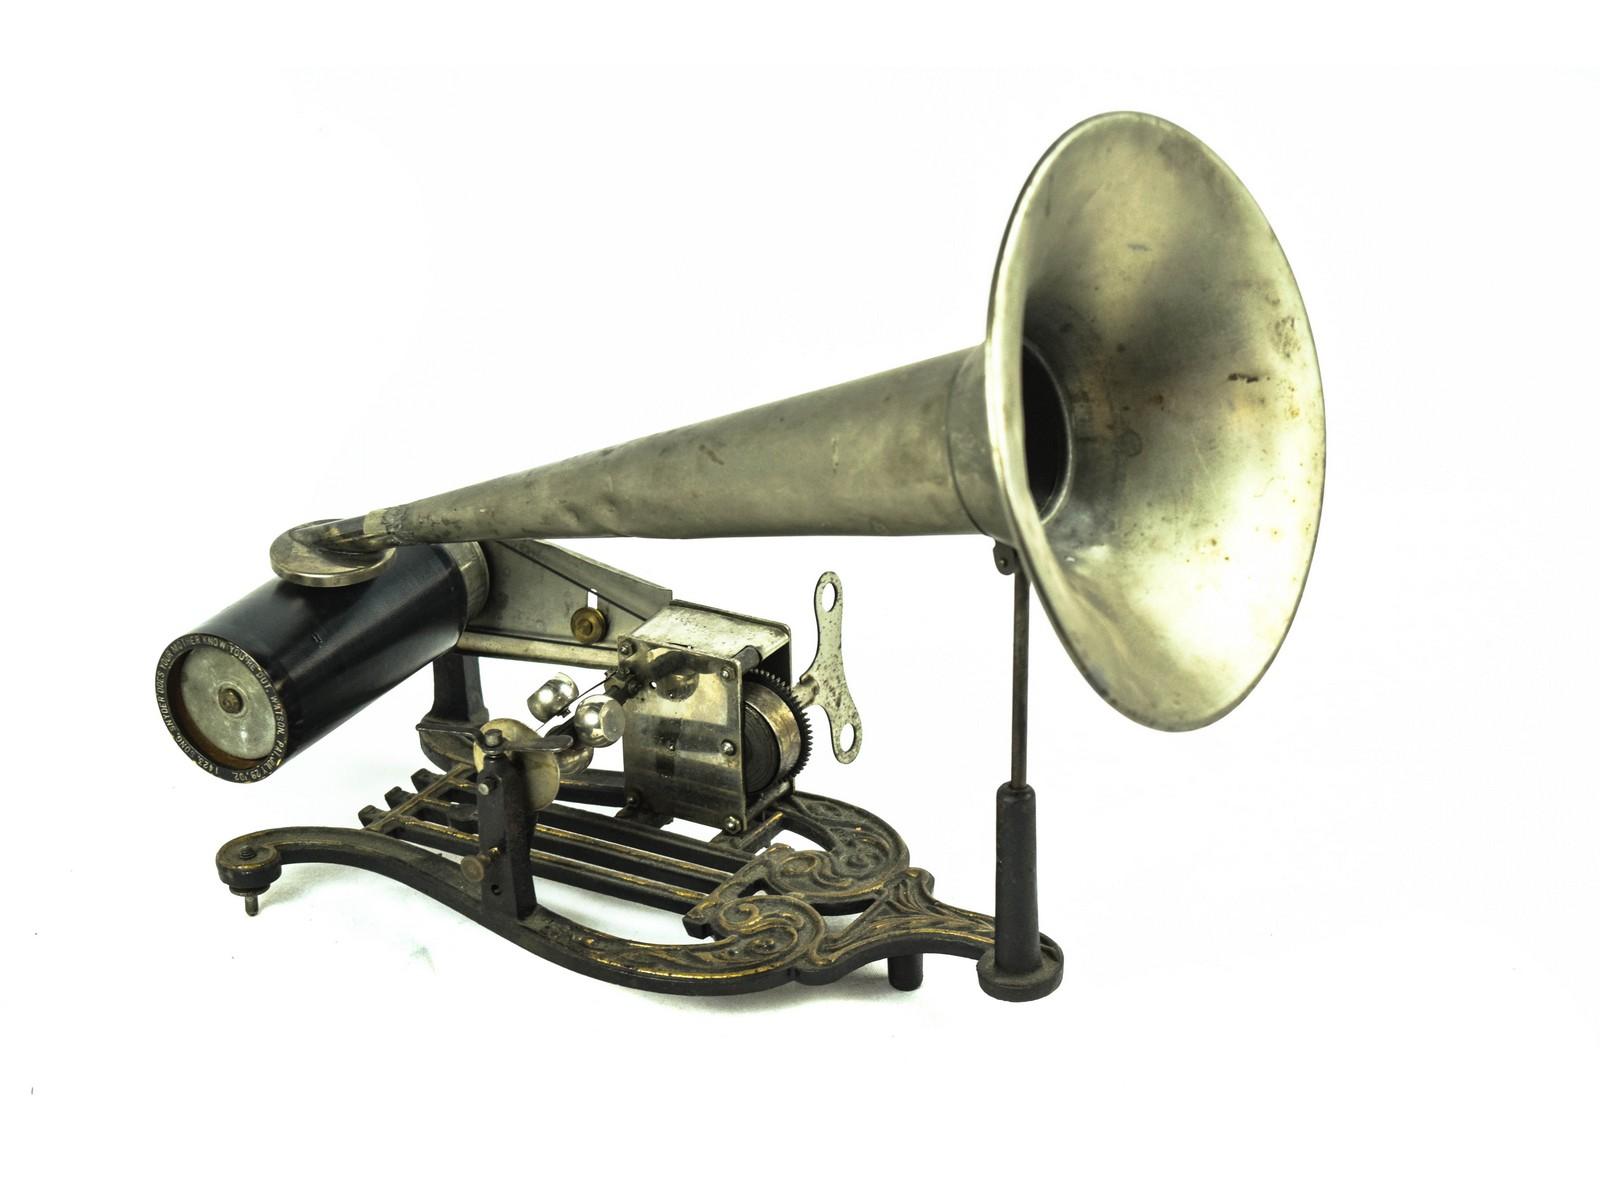 Puck Cylinder Phonograph with Horn & Reproducer